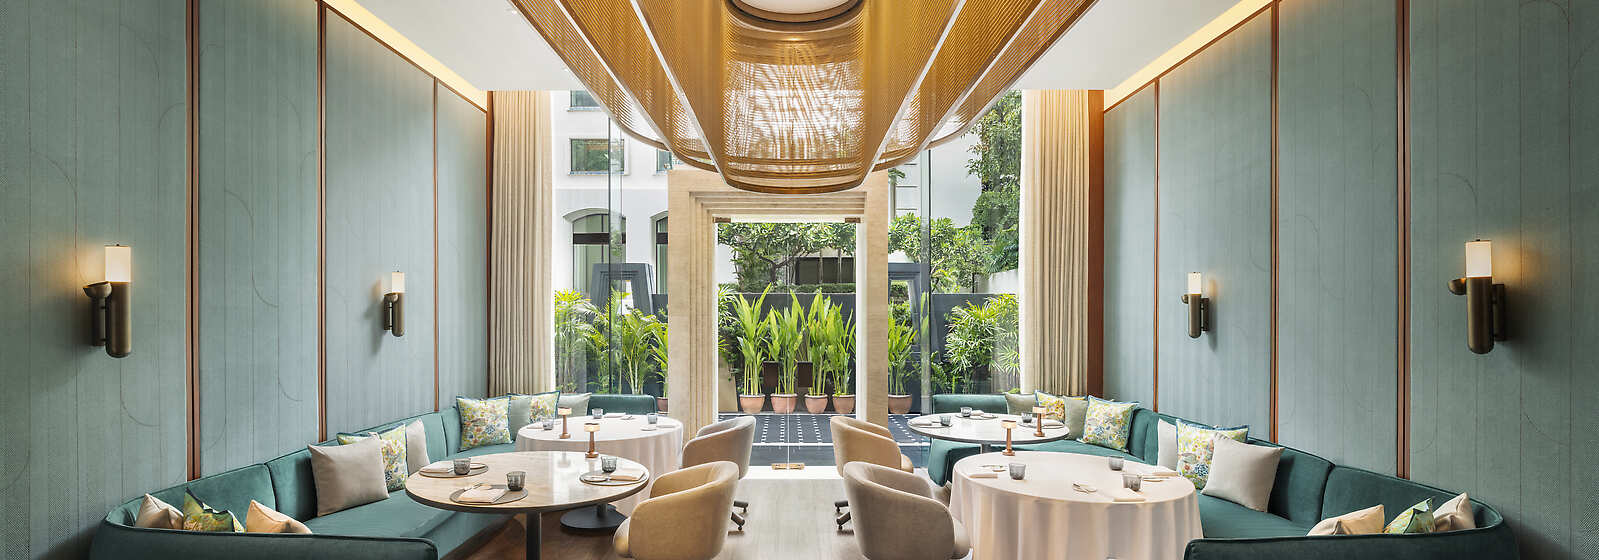 In its first location outside Switzerland, led by head chef David Hartwig, IGNIV Bangkok at The St. Regis Bangkok earns first MICHELIN Star.